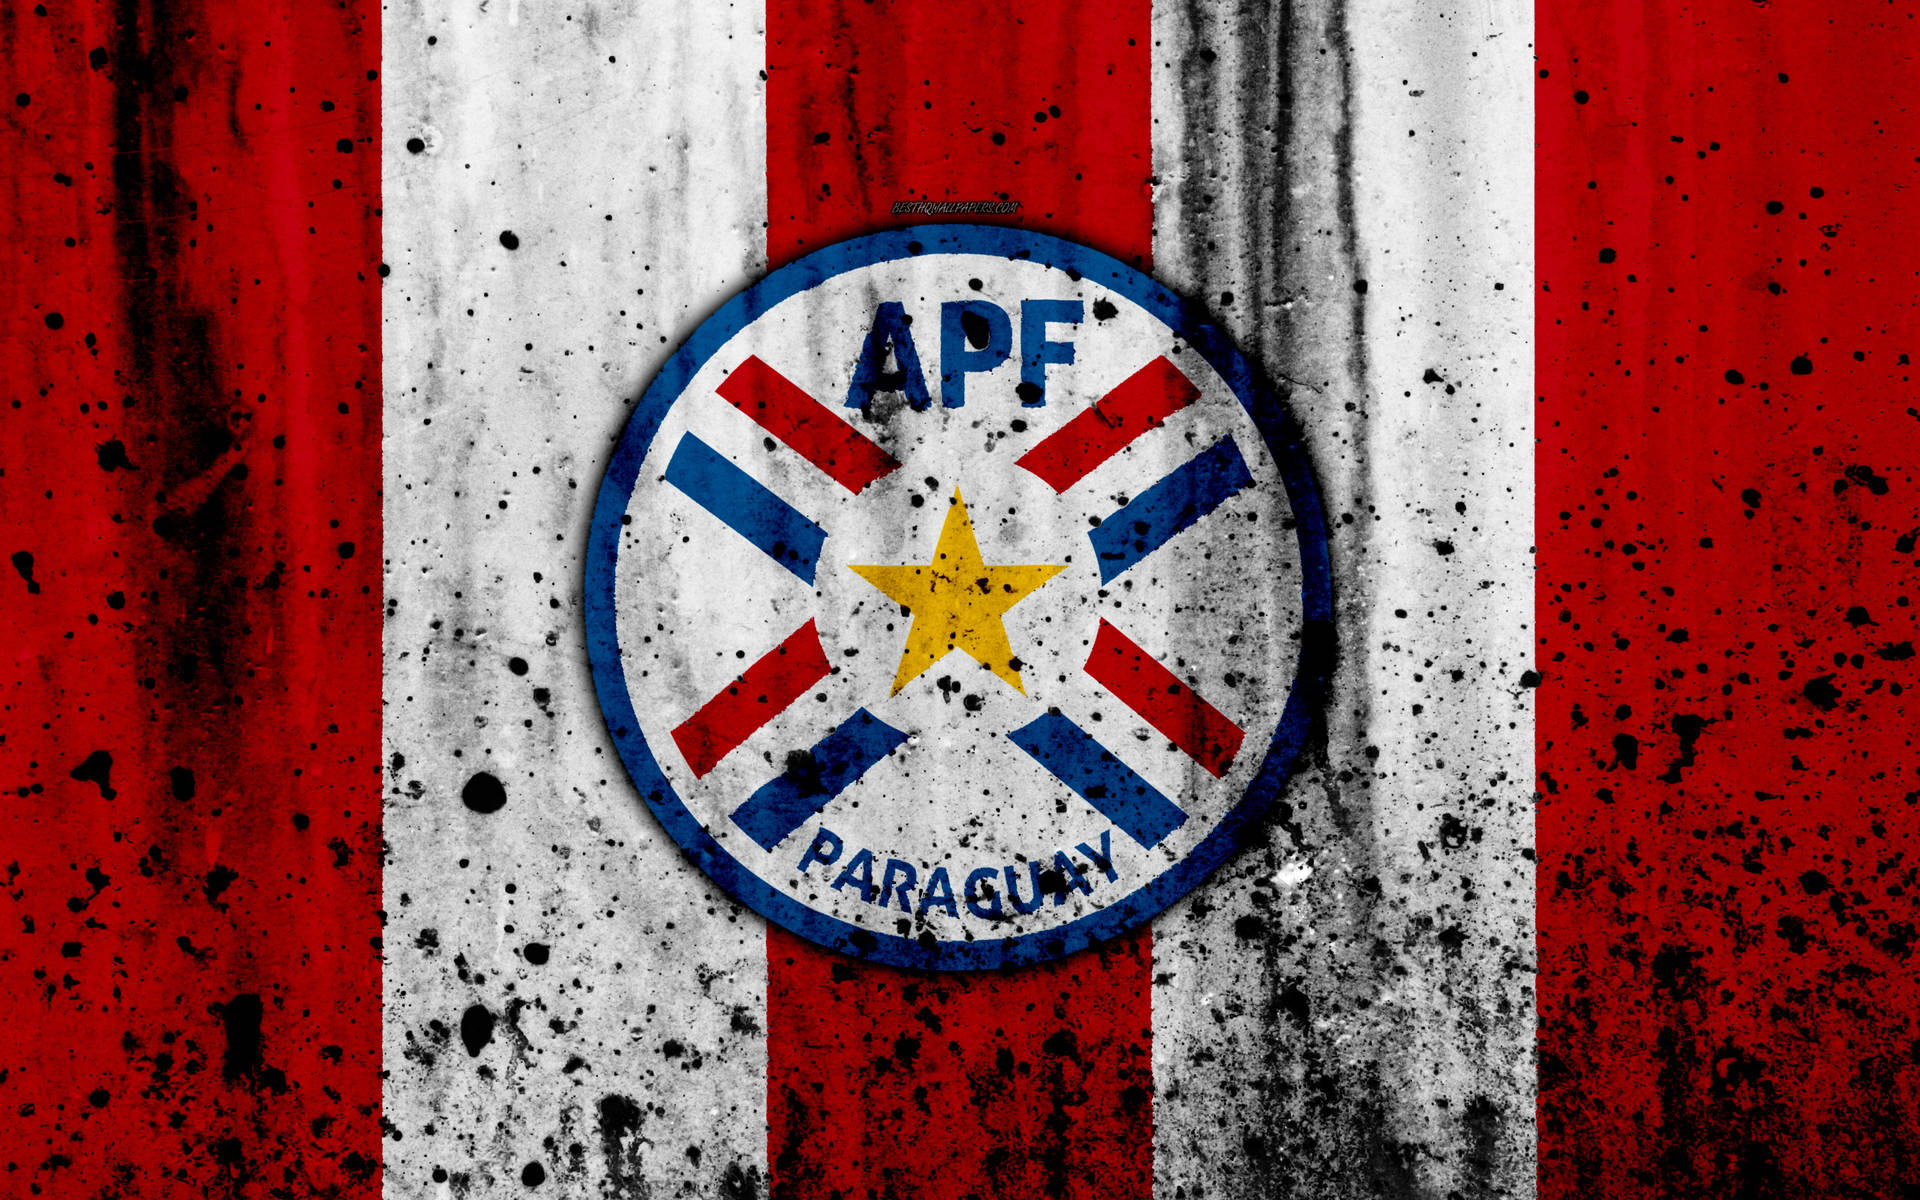 Paraguay Apf Patch Background